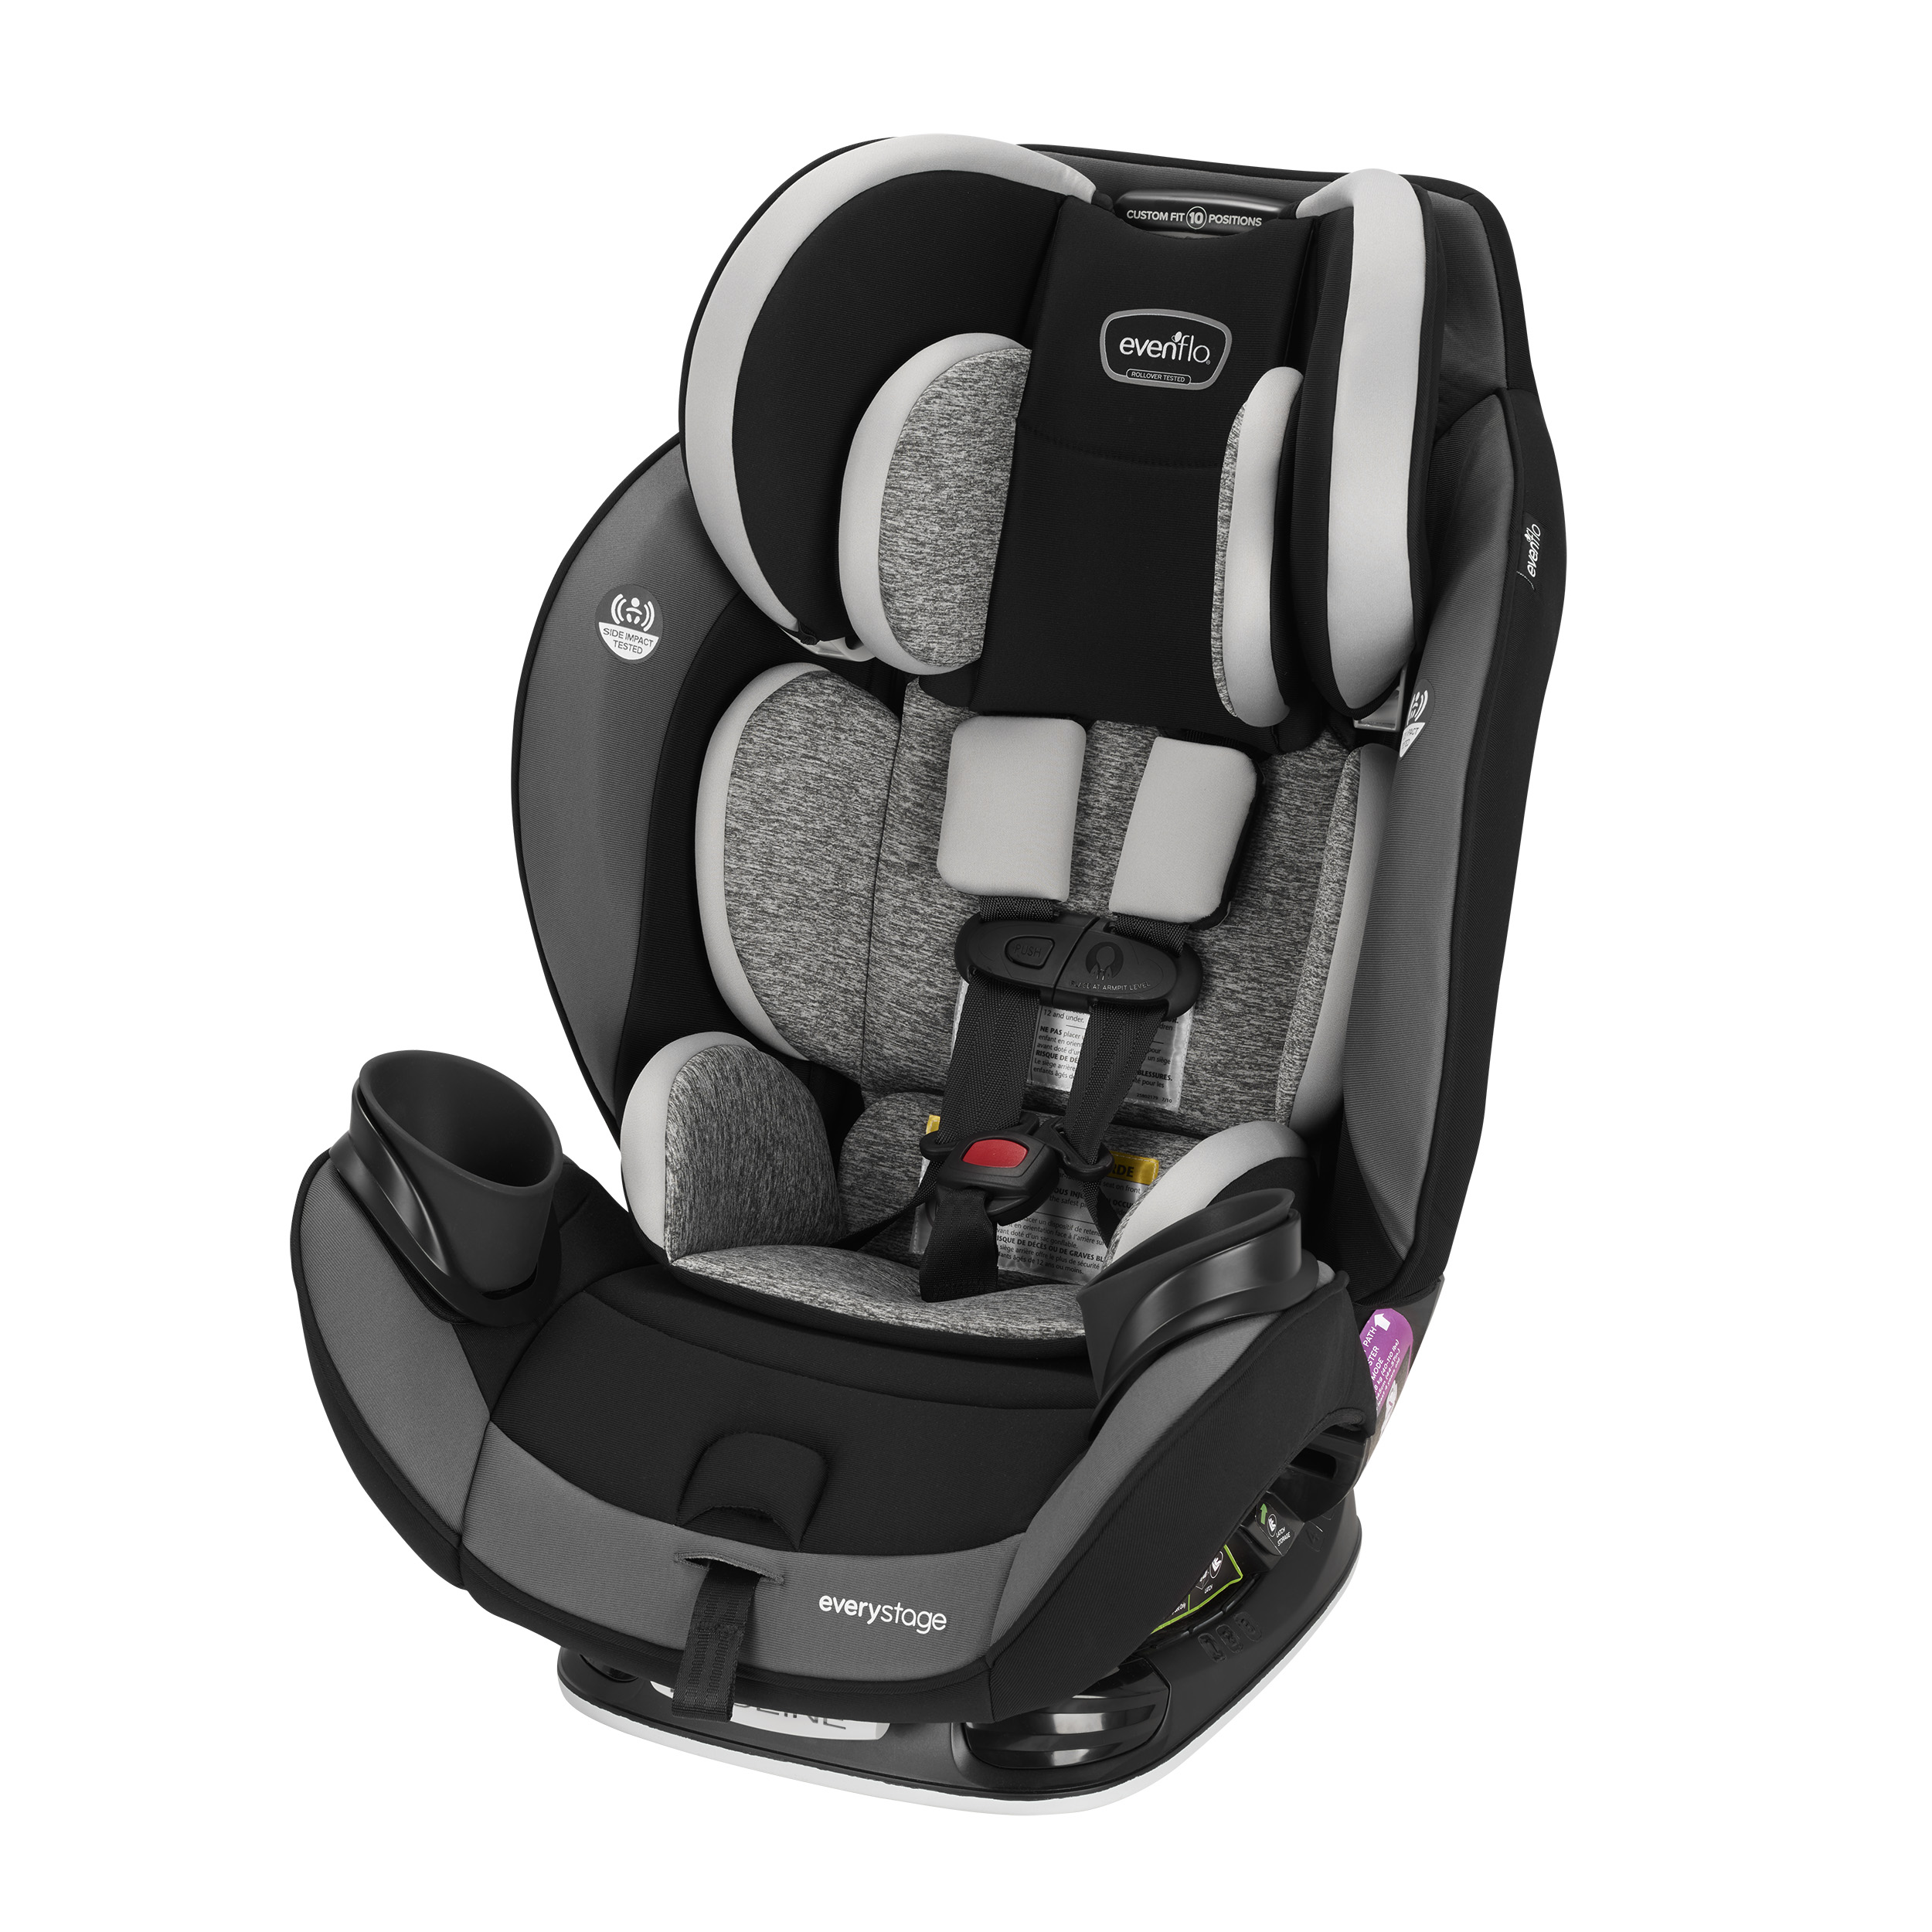 Evenflo EveryStage DLX All-in-One Kids Rear Facing Convertible Car Seat